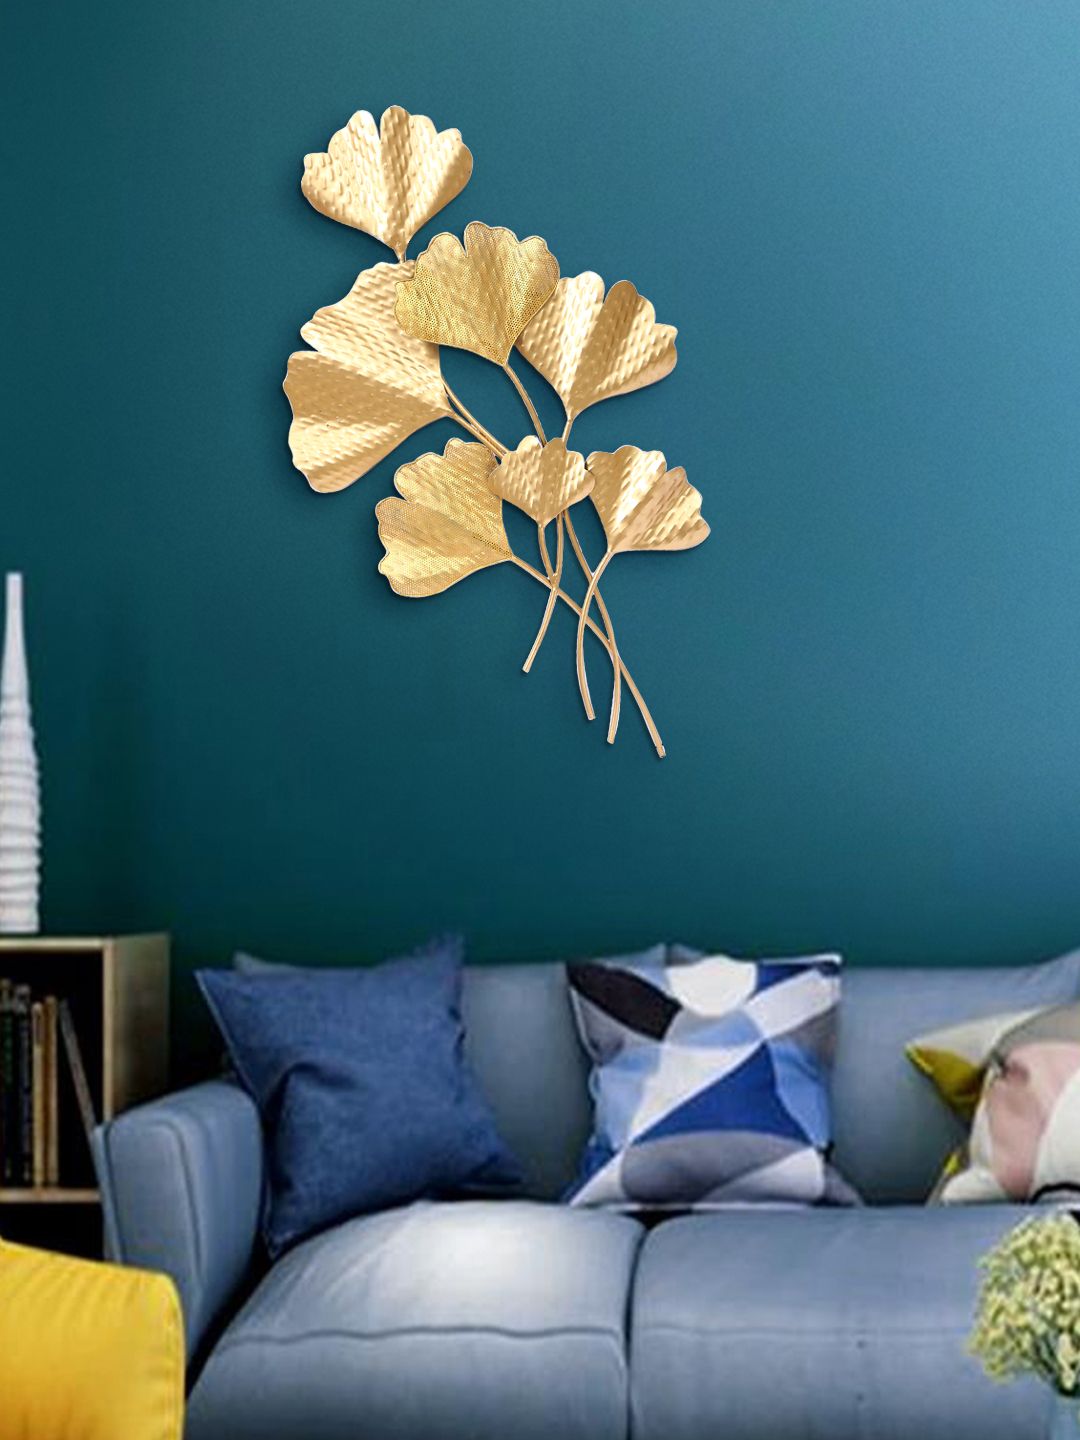 Aapno Rajasthan Resplendent Golden Anam Leaf Wall Decor Price in India